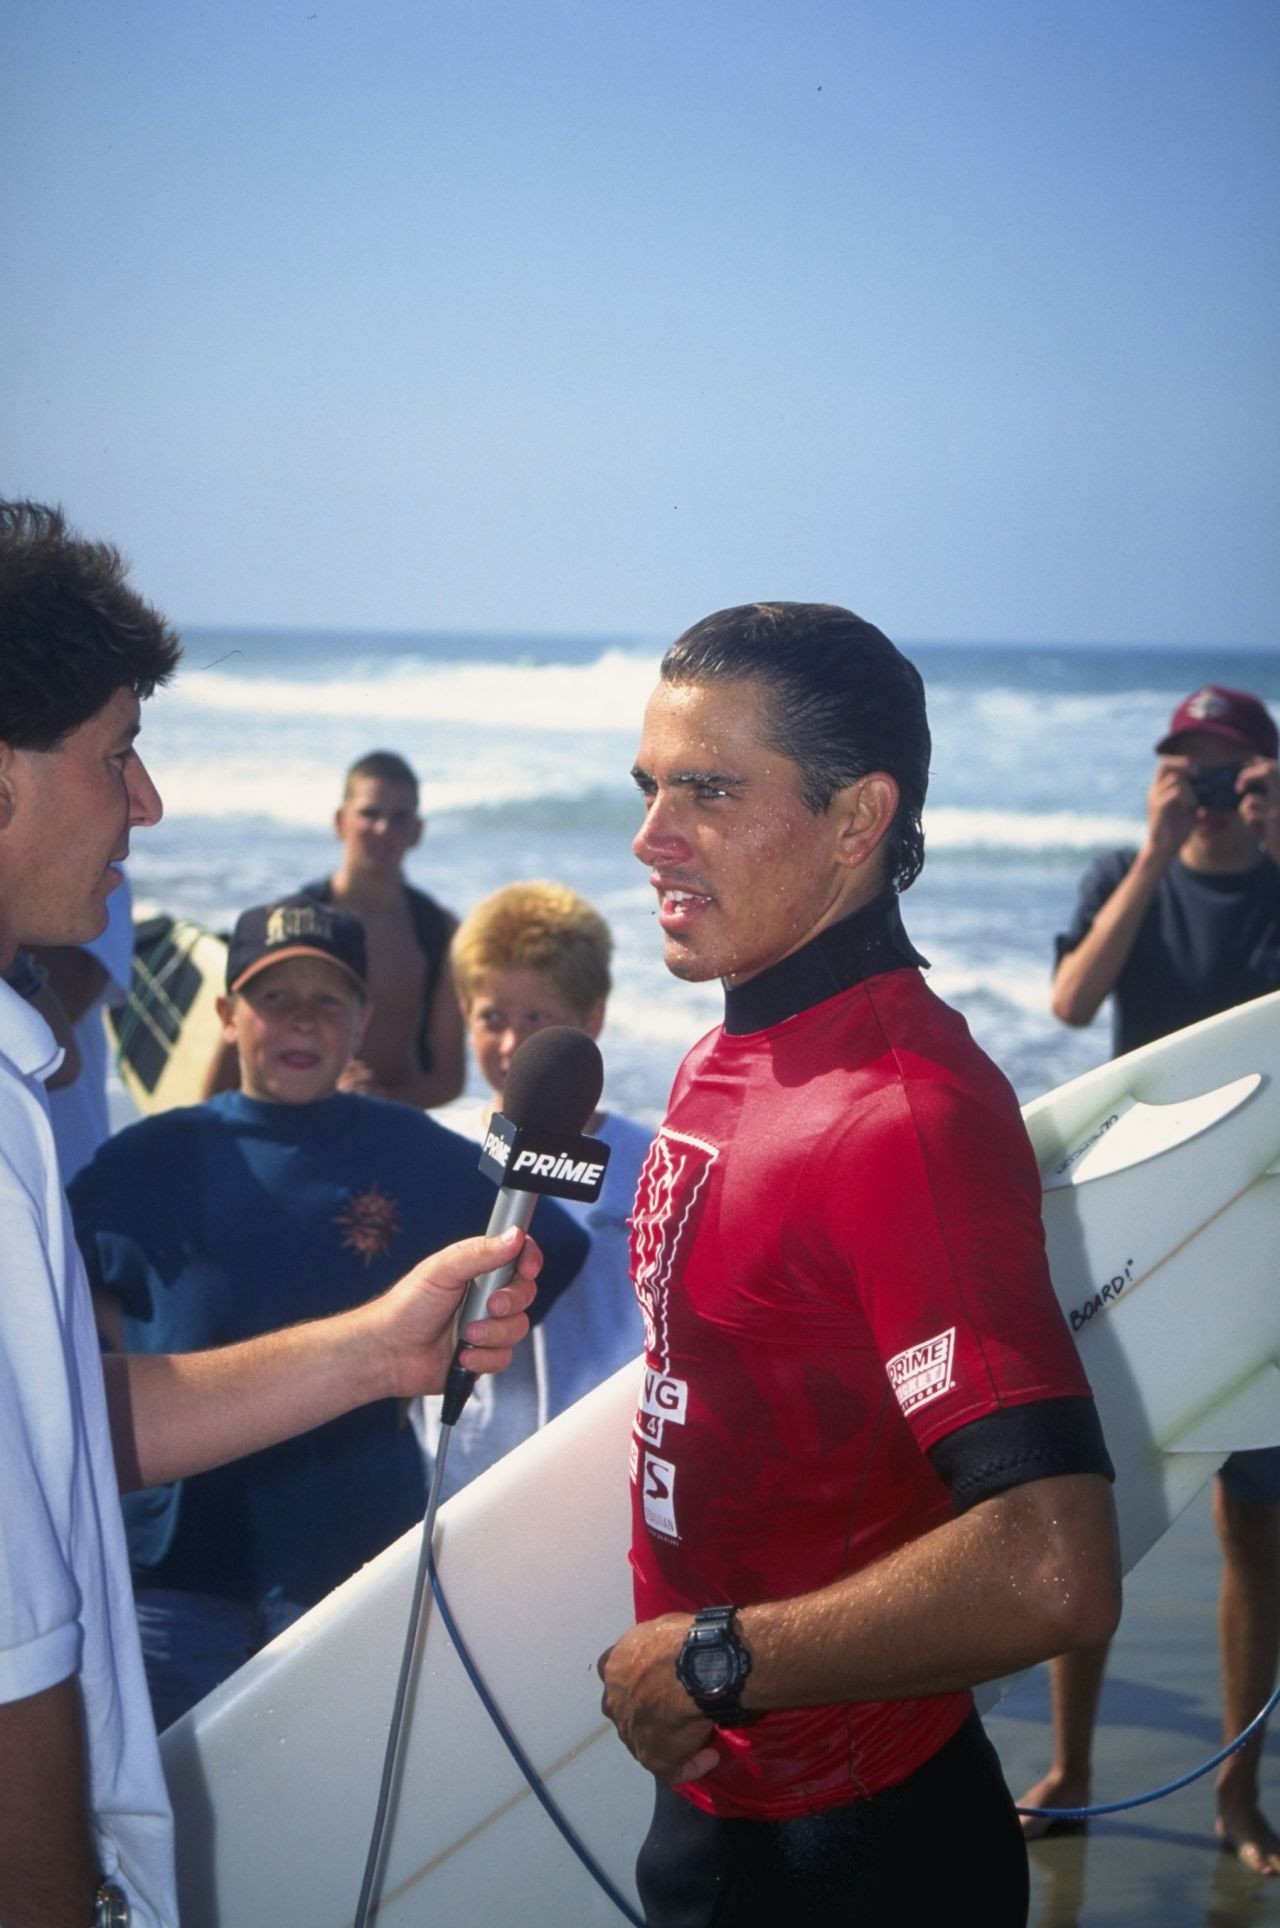 As a child growing up on the waves at Florida's Cocoa Beach, Slater never imagined surfing would be a career. By 1992, he had become the youngest world champion at 20. 